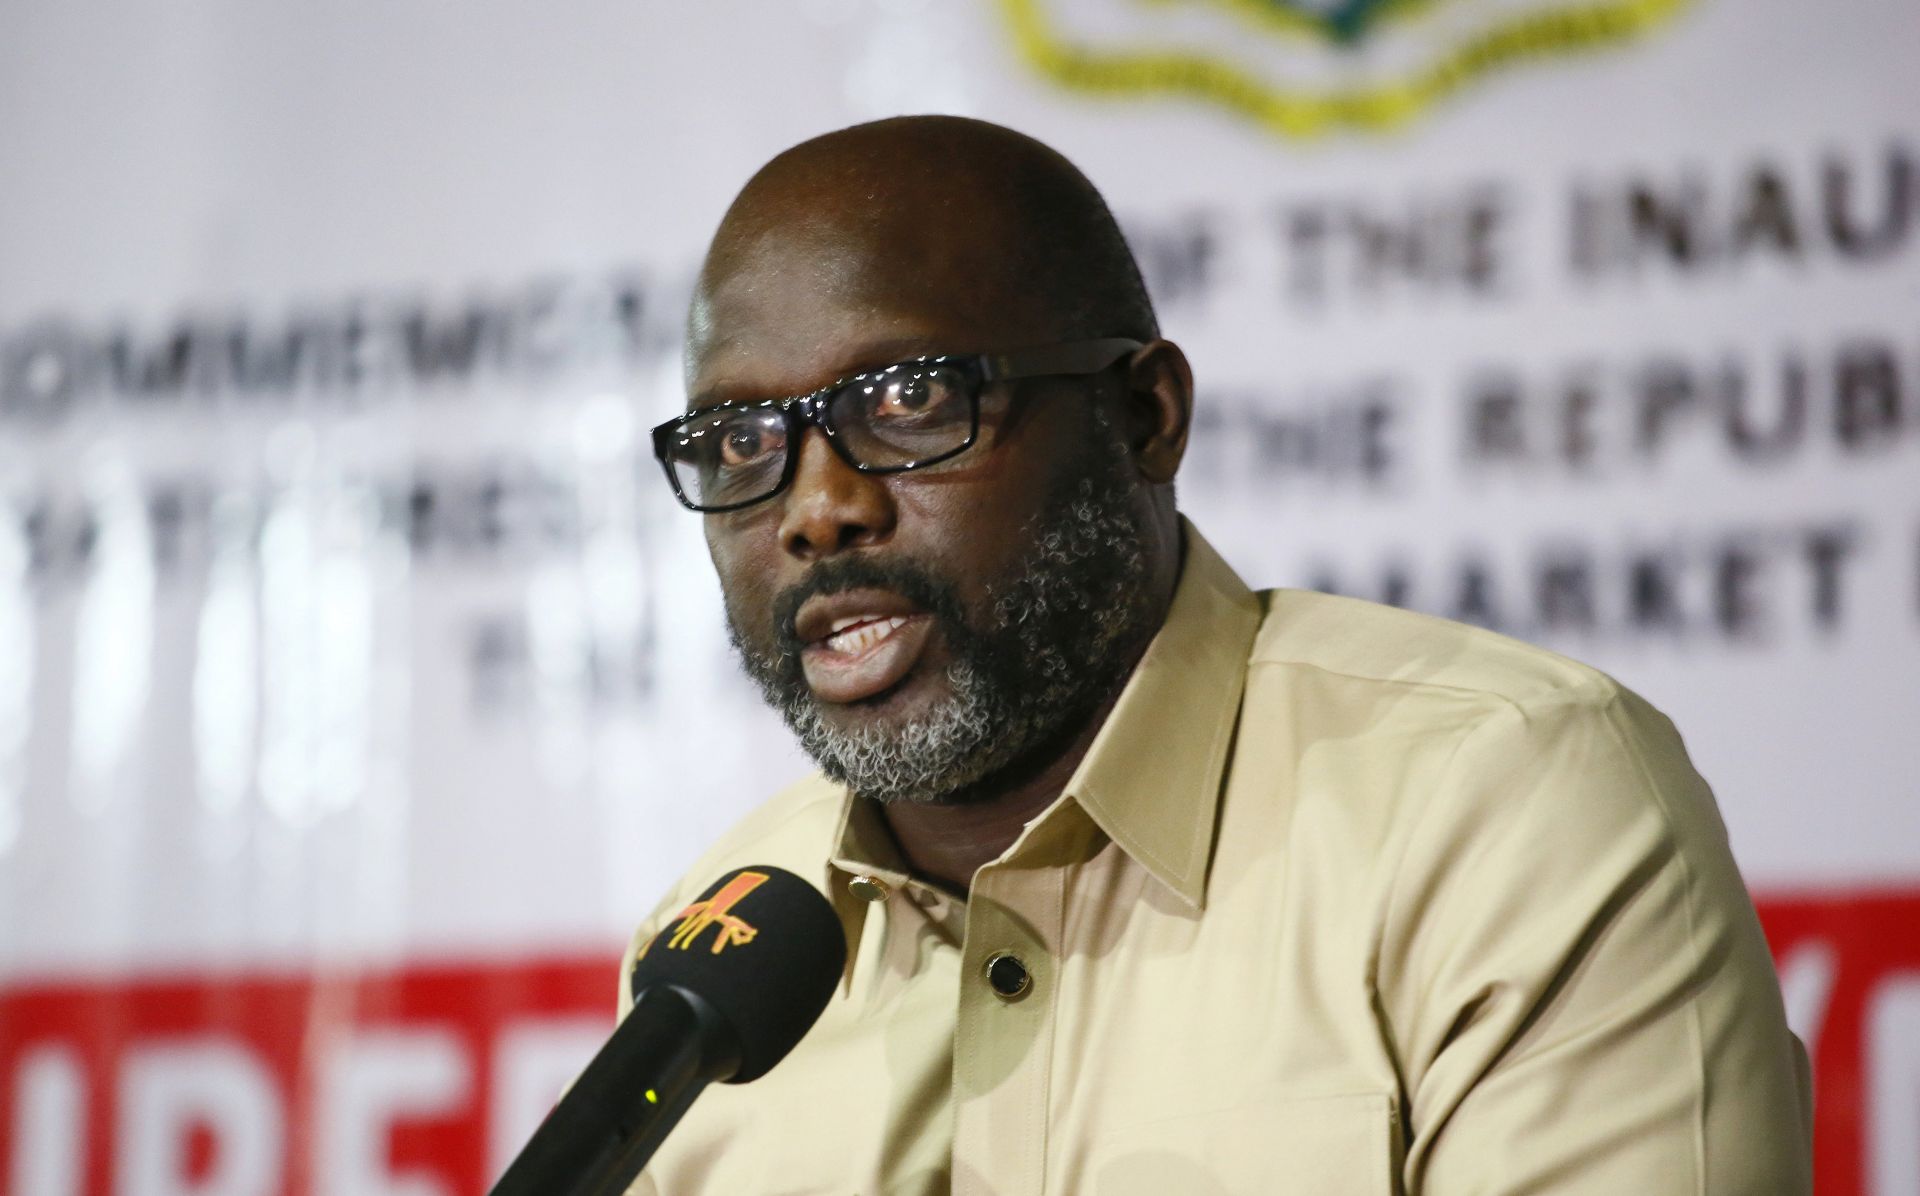 epa06455126 Liberia's president elect, George Weah(L), speaks during an exhibition of Liberian made products at the Liberia Market place, Nancy B. Doe Market in Monrovia, as part of events marking his official inauguration ceremony in Monrovia, Liberia, 19 January 2018. Weah will be sworn in as president on 22 January, to succeed incumbent president, and Africa's first female democratically elected president, Sirleaf, who concludes her second and final term in office.  EPA/AHMED JALLANZO